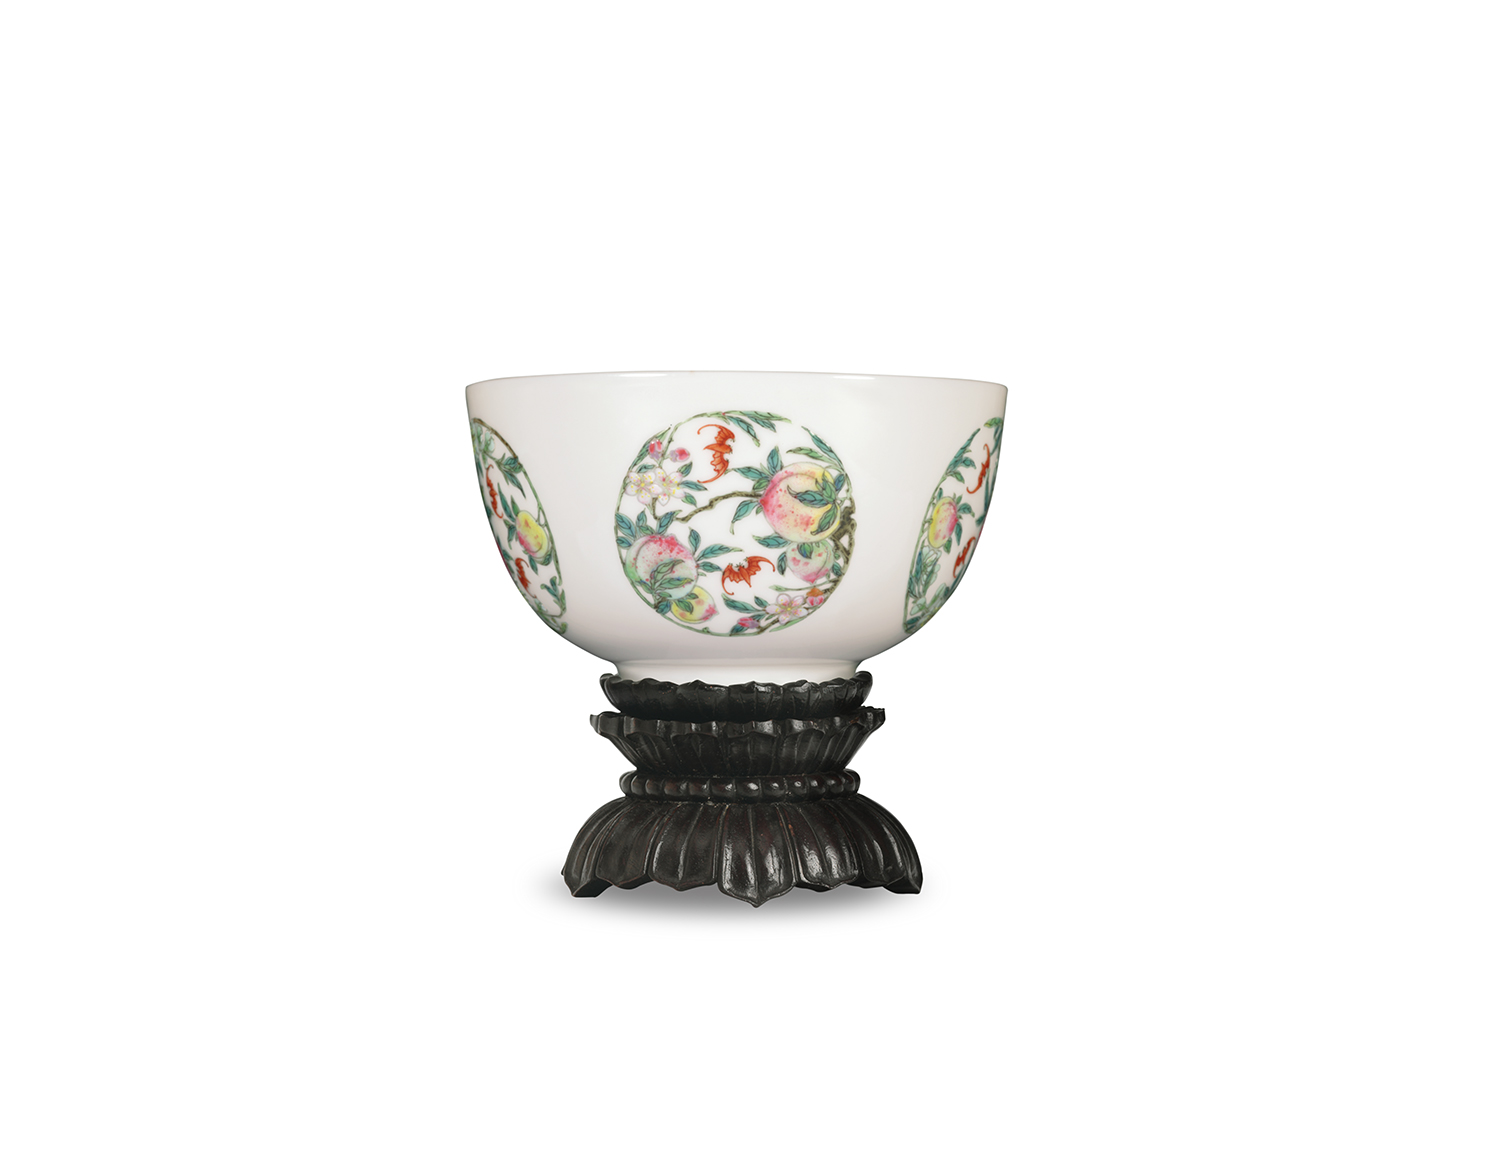 Bowl with bat and peach design in fencai enamels<br> Six-character mark of Yongzheng and of the period (1723 – 1735), Qing dynasty